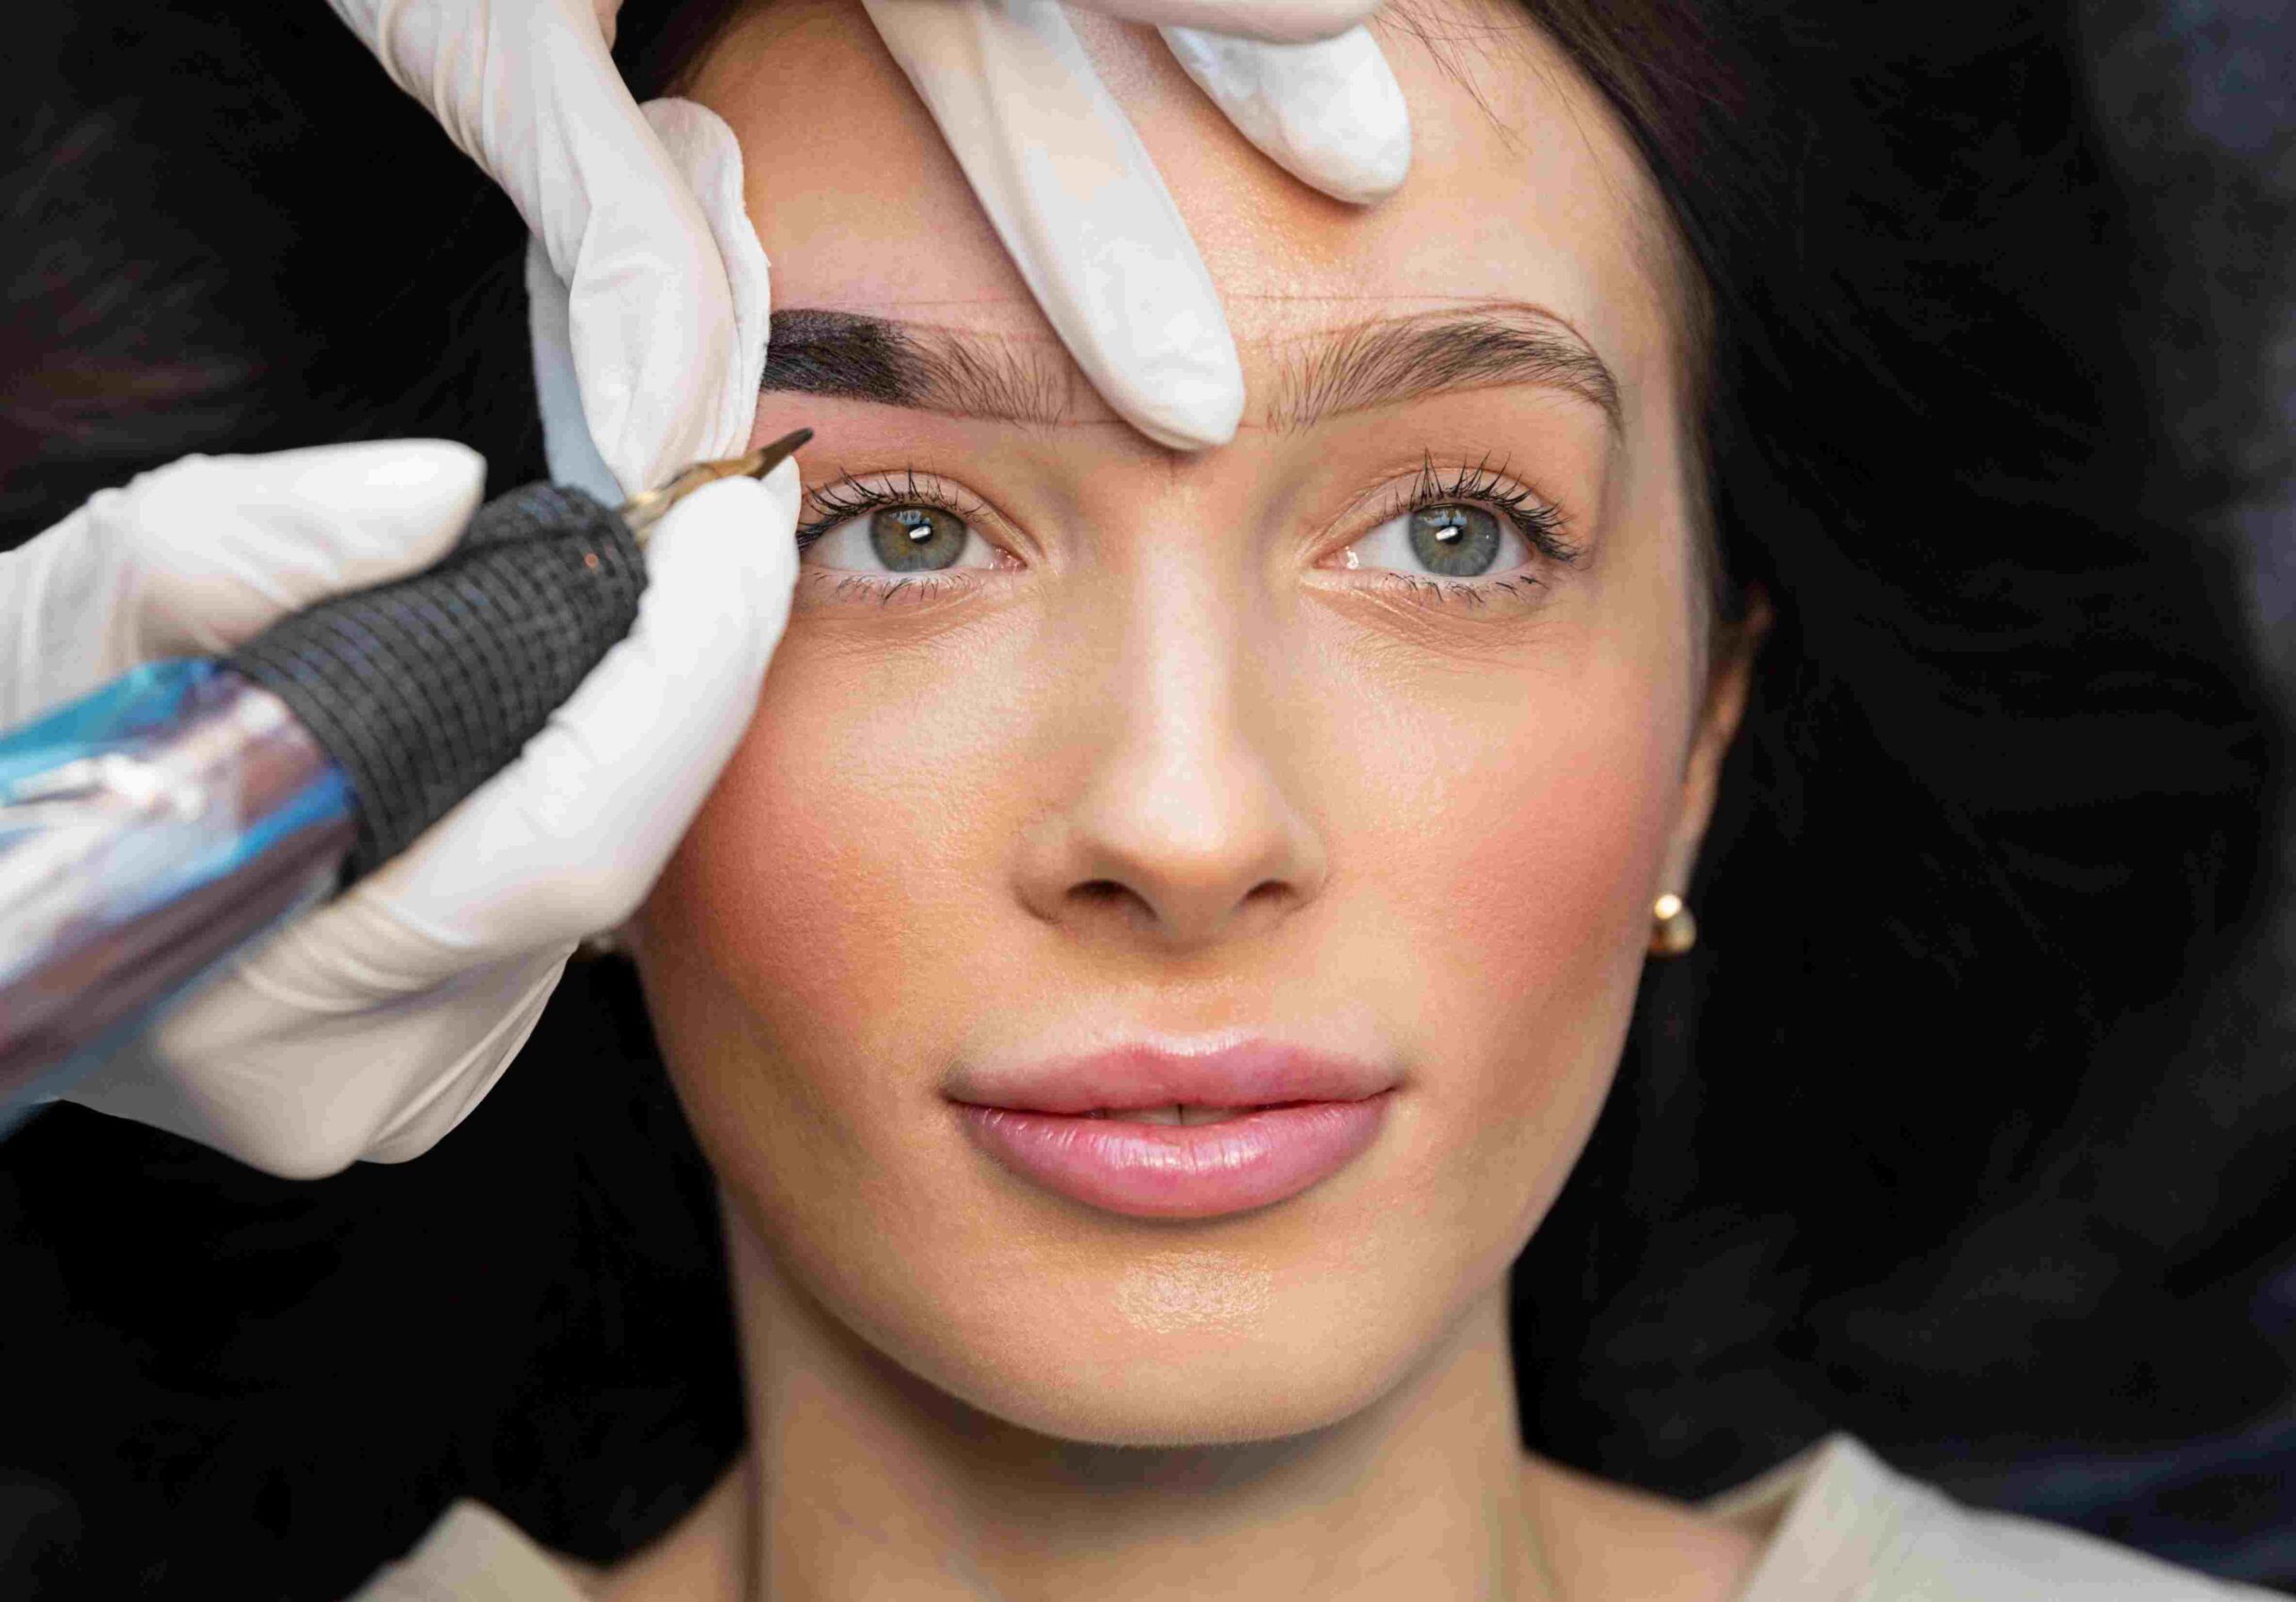 How to Fill in Patchy Eyebrows With Eyebrow Transplantation? Learn the procedure, recovery, and results.